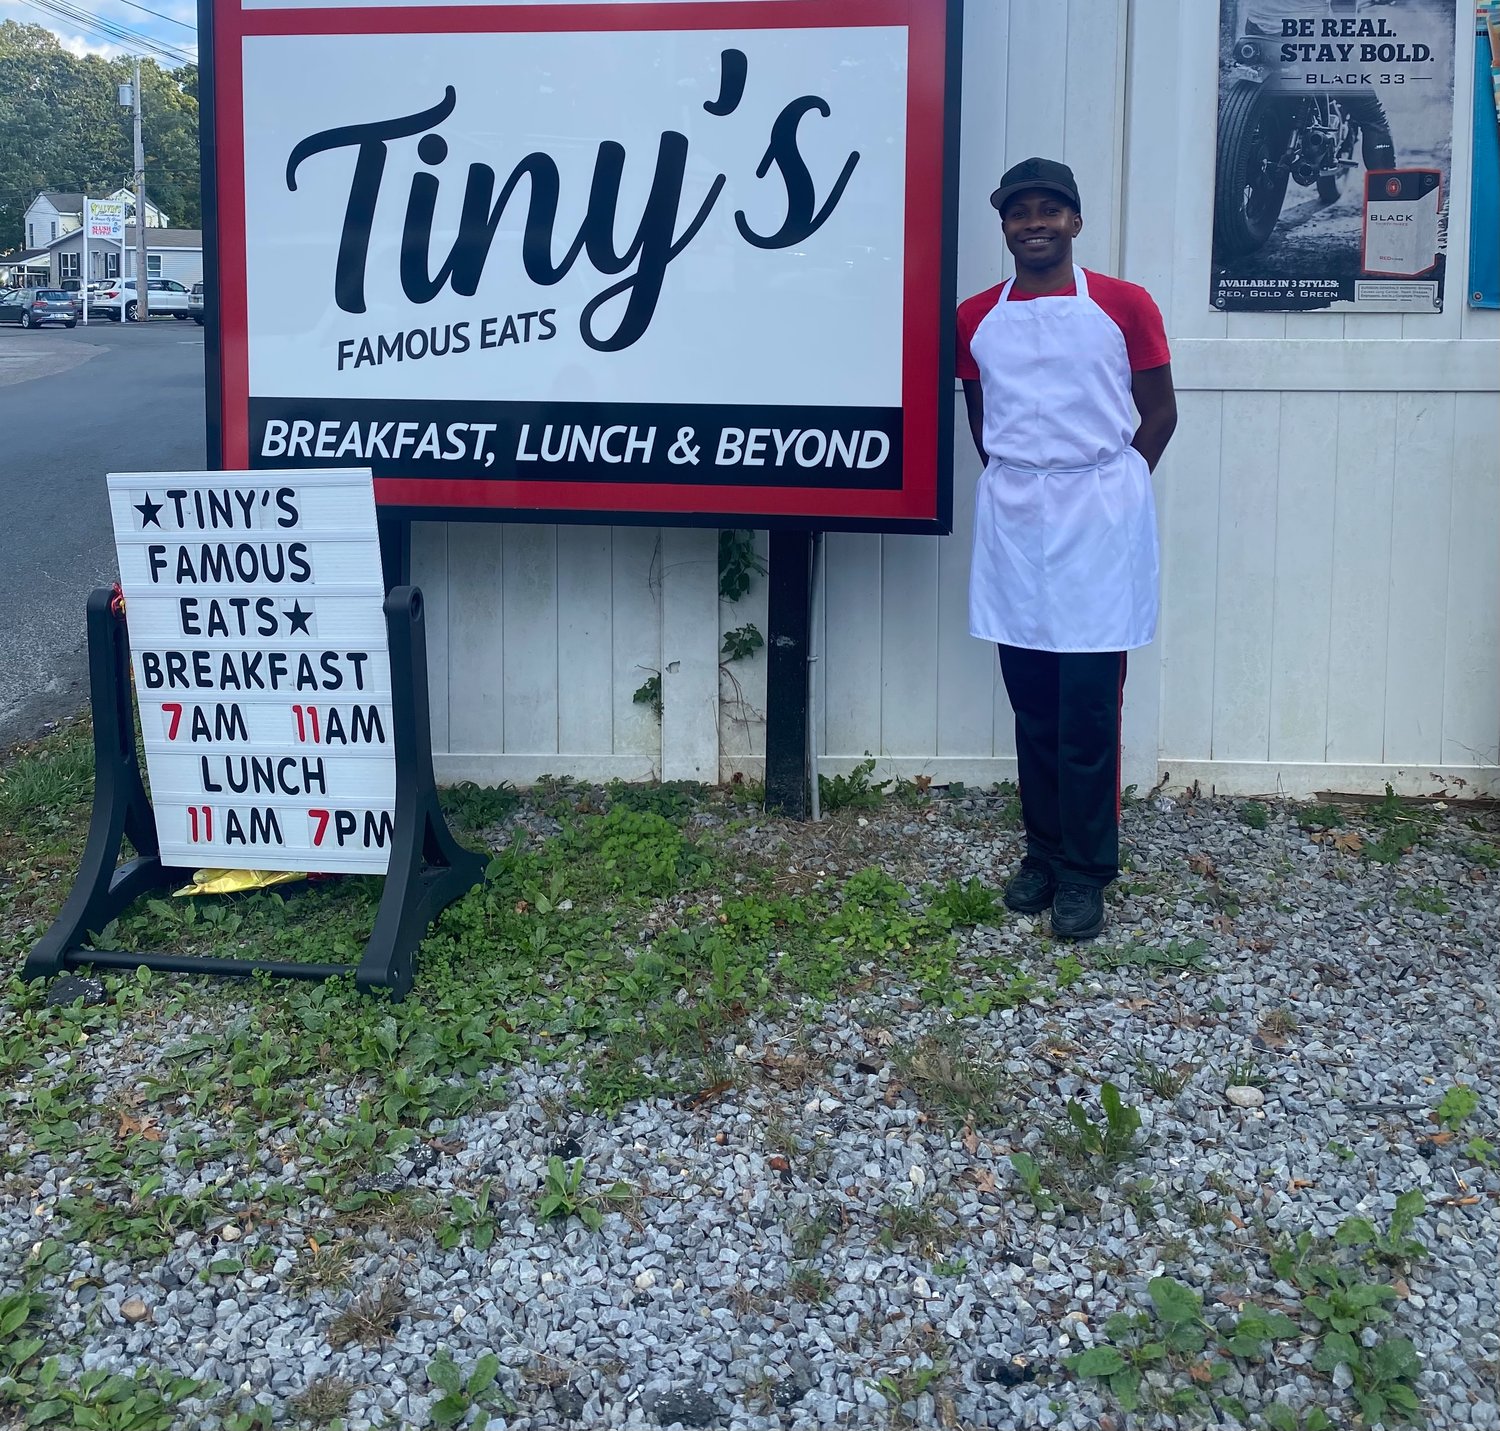 Tiny's Famous Eats' chef and owner Justin Edwards.